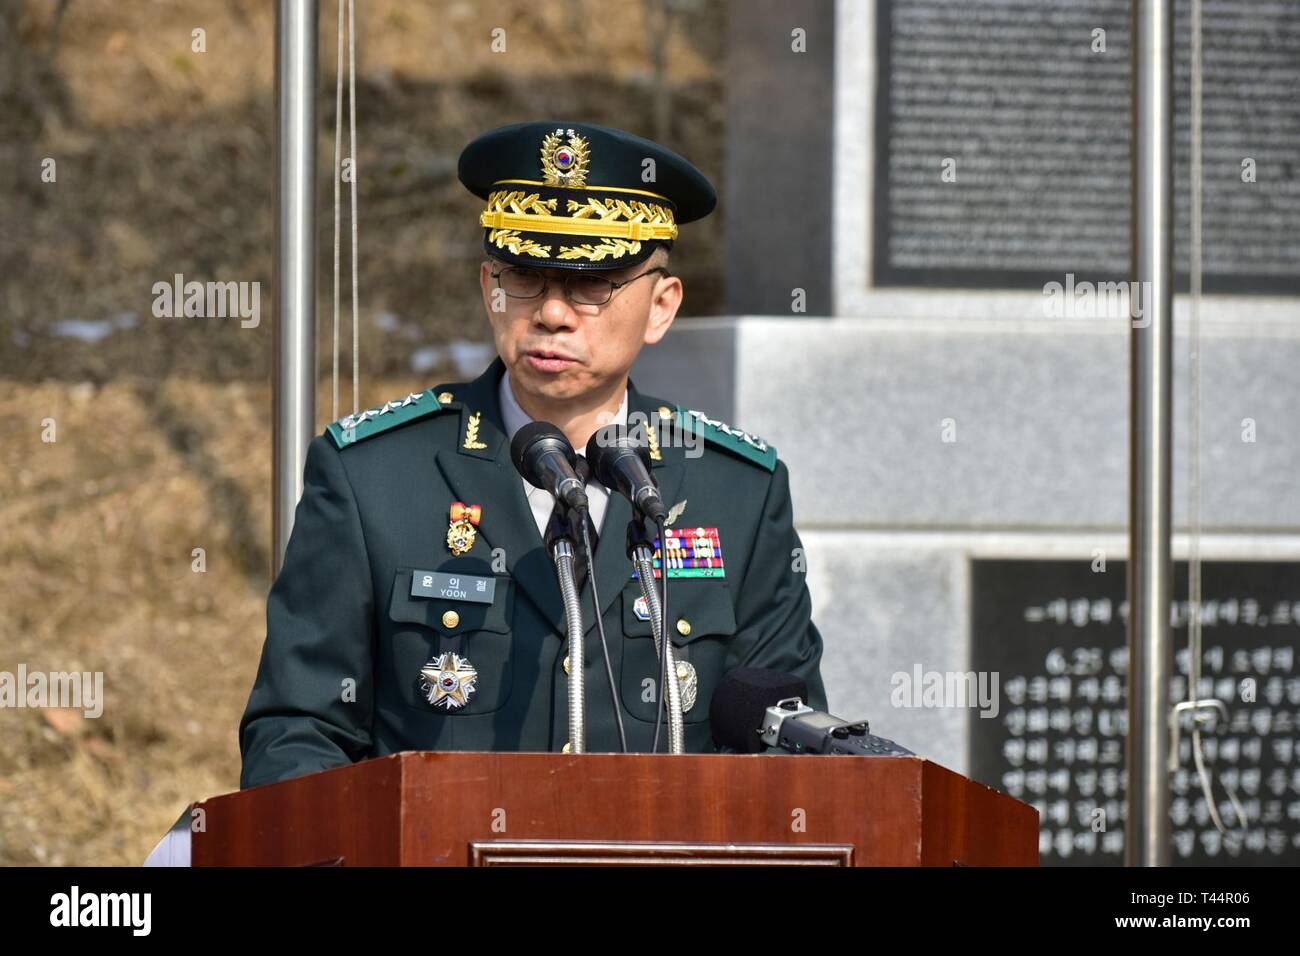 CHIPYONG-NI, Republic of Korea – Lt. Gen. Yoon, Eui Cheol, commanding general, 7th Corps, Republic of Korea-Army, speaks about an historical turning point of the Korean War during the 68th anniversary commemoration for the Battle of Chipyong-ni at the Chipyong-ni Combat Monument and Memorial Hall, Feb. 21. Yoon presided over the event which highlighted the three-day battle in February 1951. Stock Photo